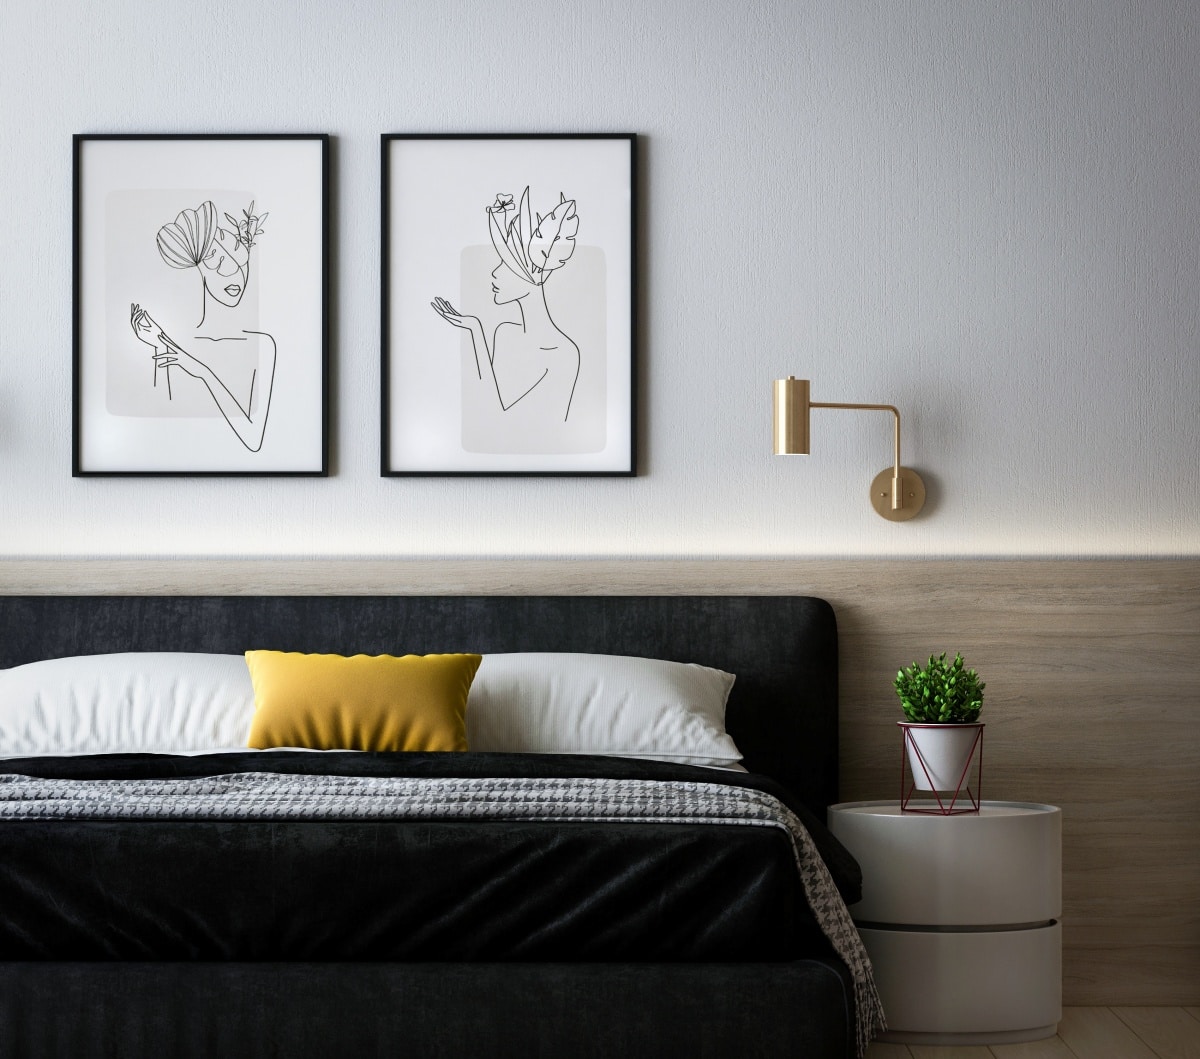 Minimalist line art in matching black frames placed above a bed with black and white linen